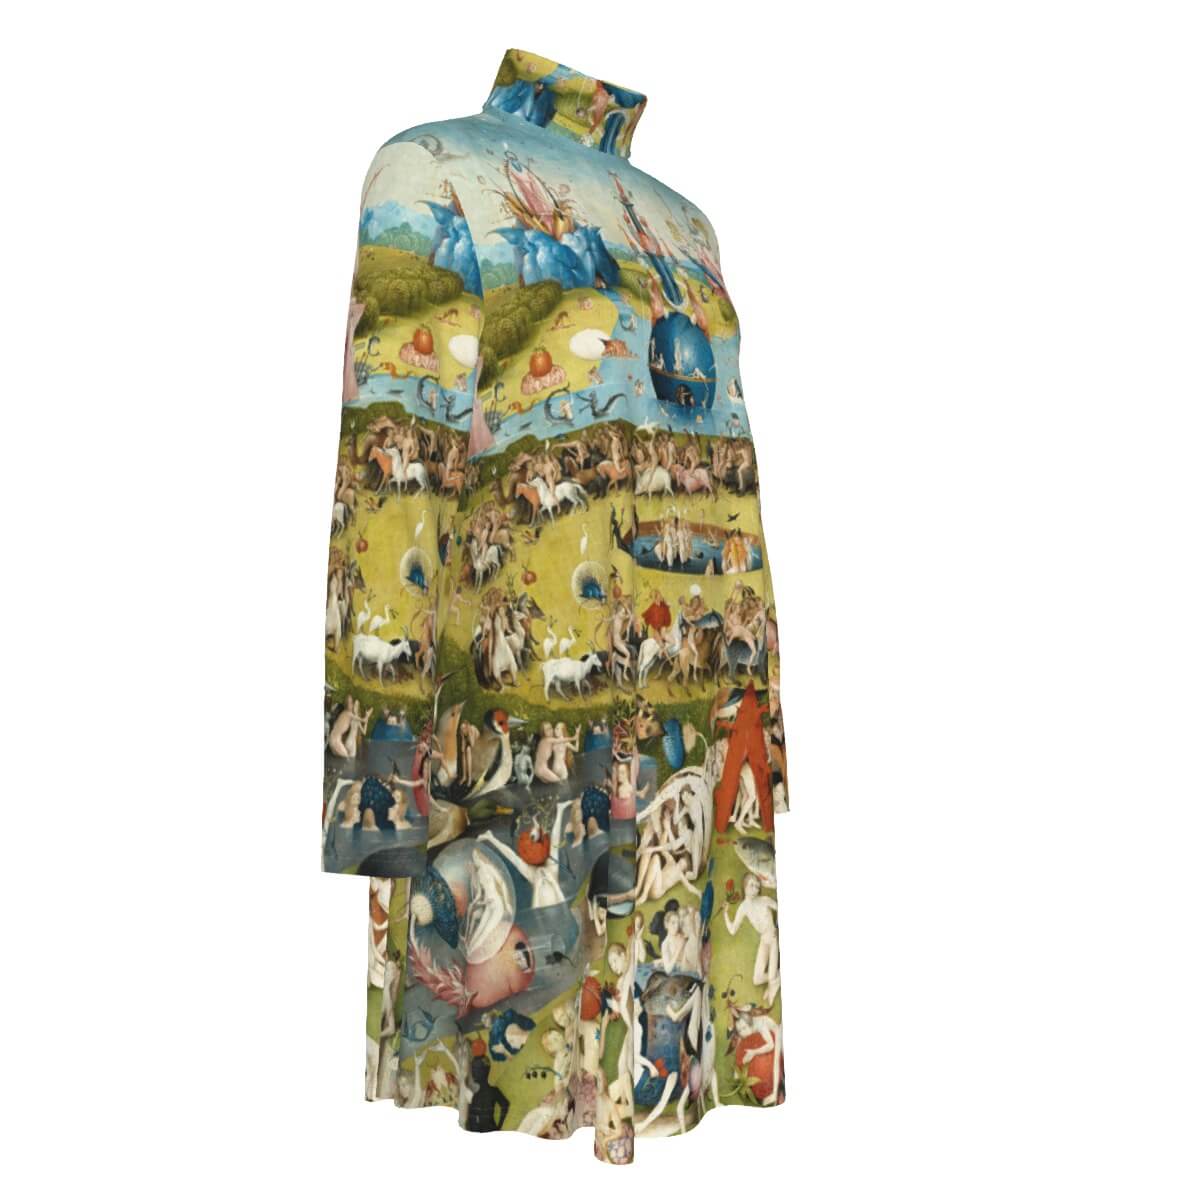 Unique Fashion with Paintings